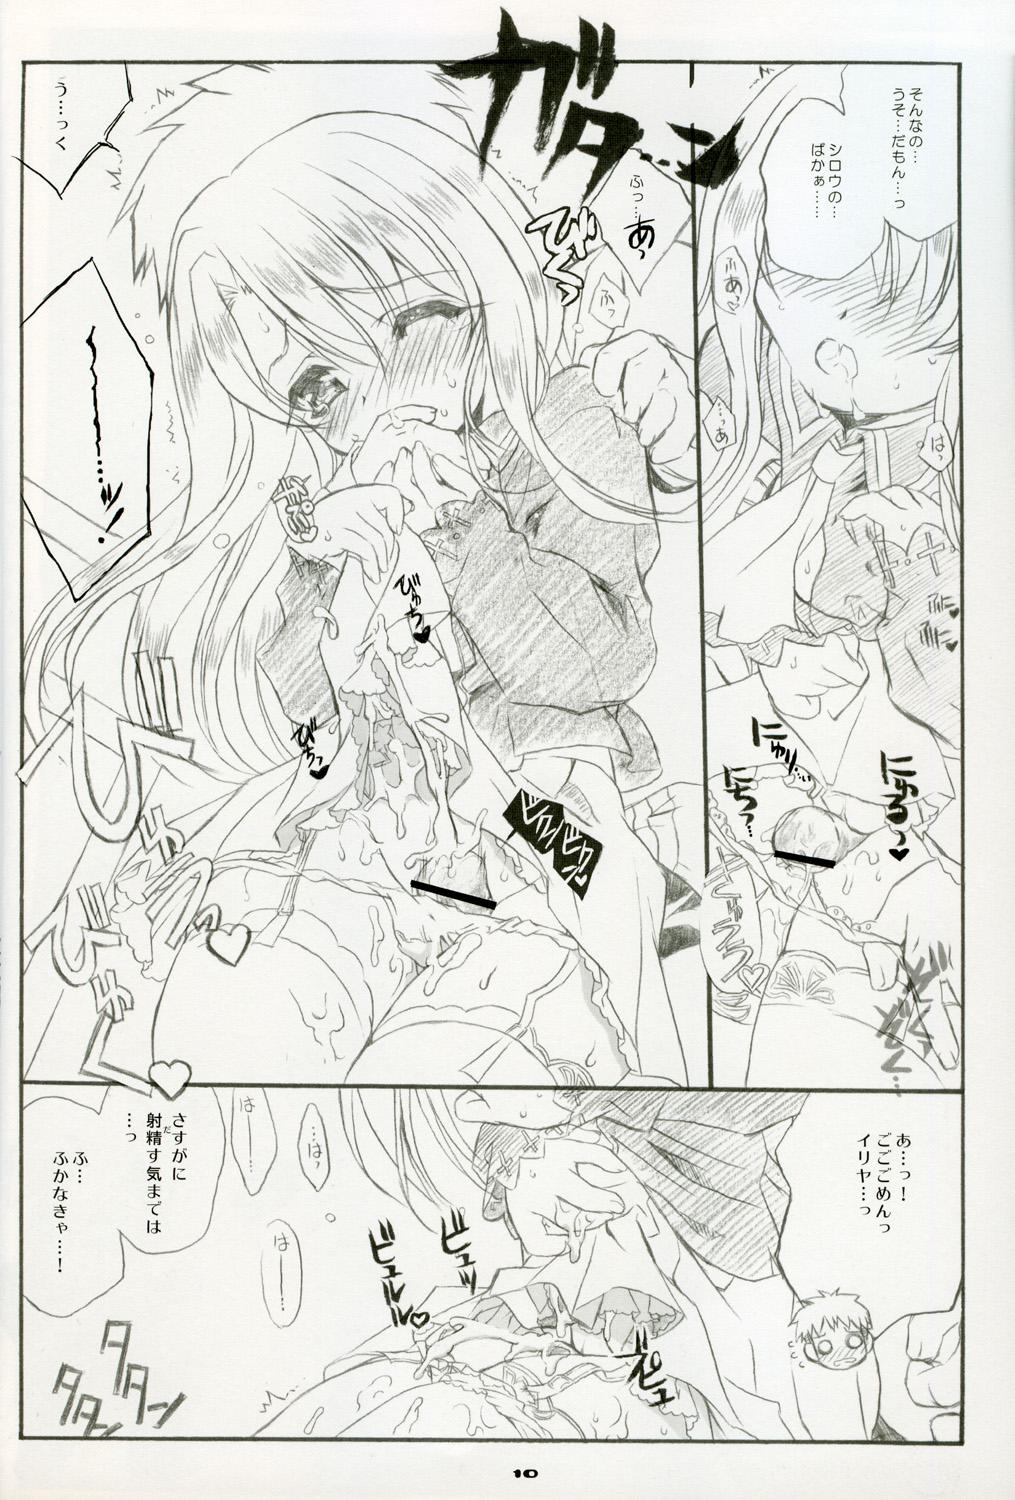 Pregnant Illya Train Shopping - Fate stay night Stretch - Page 10